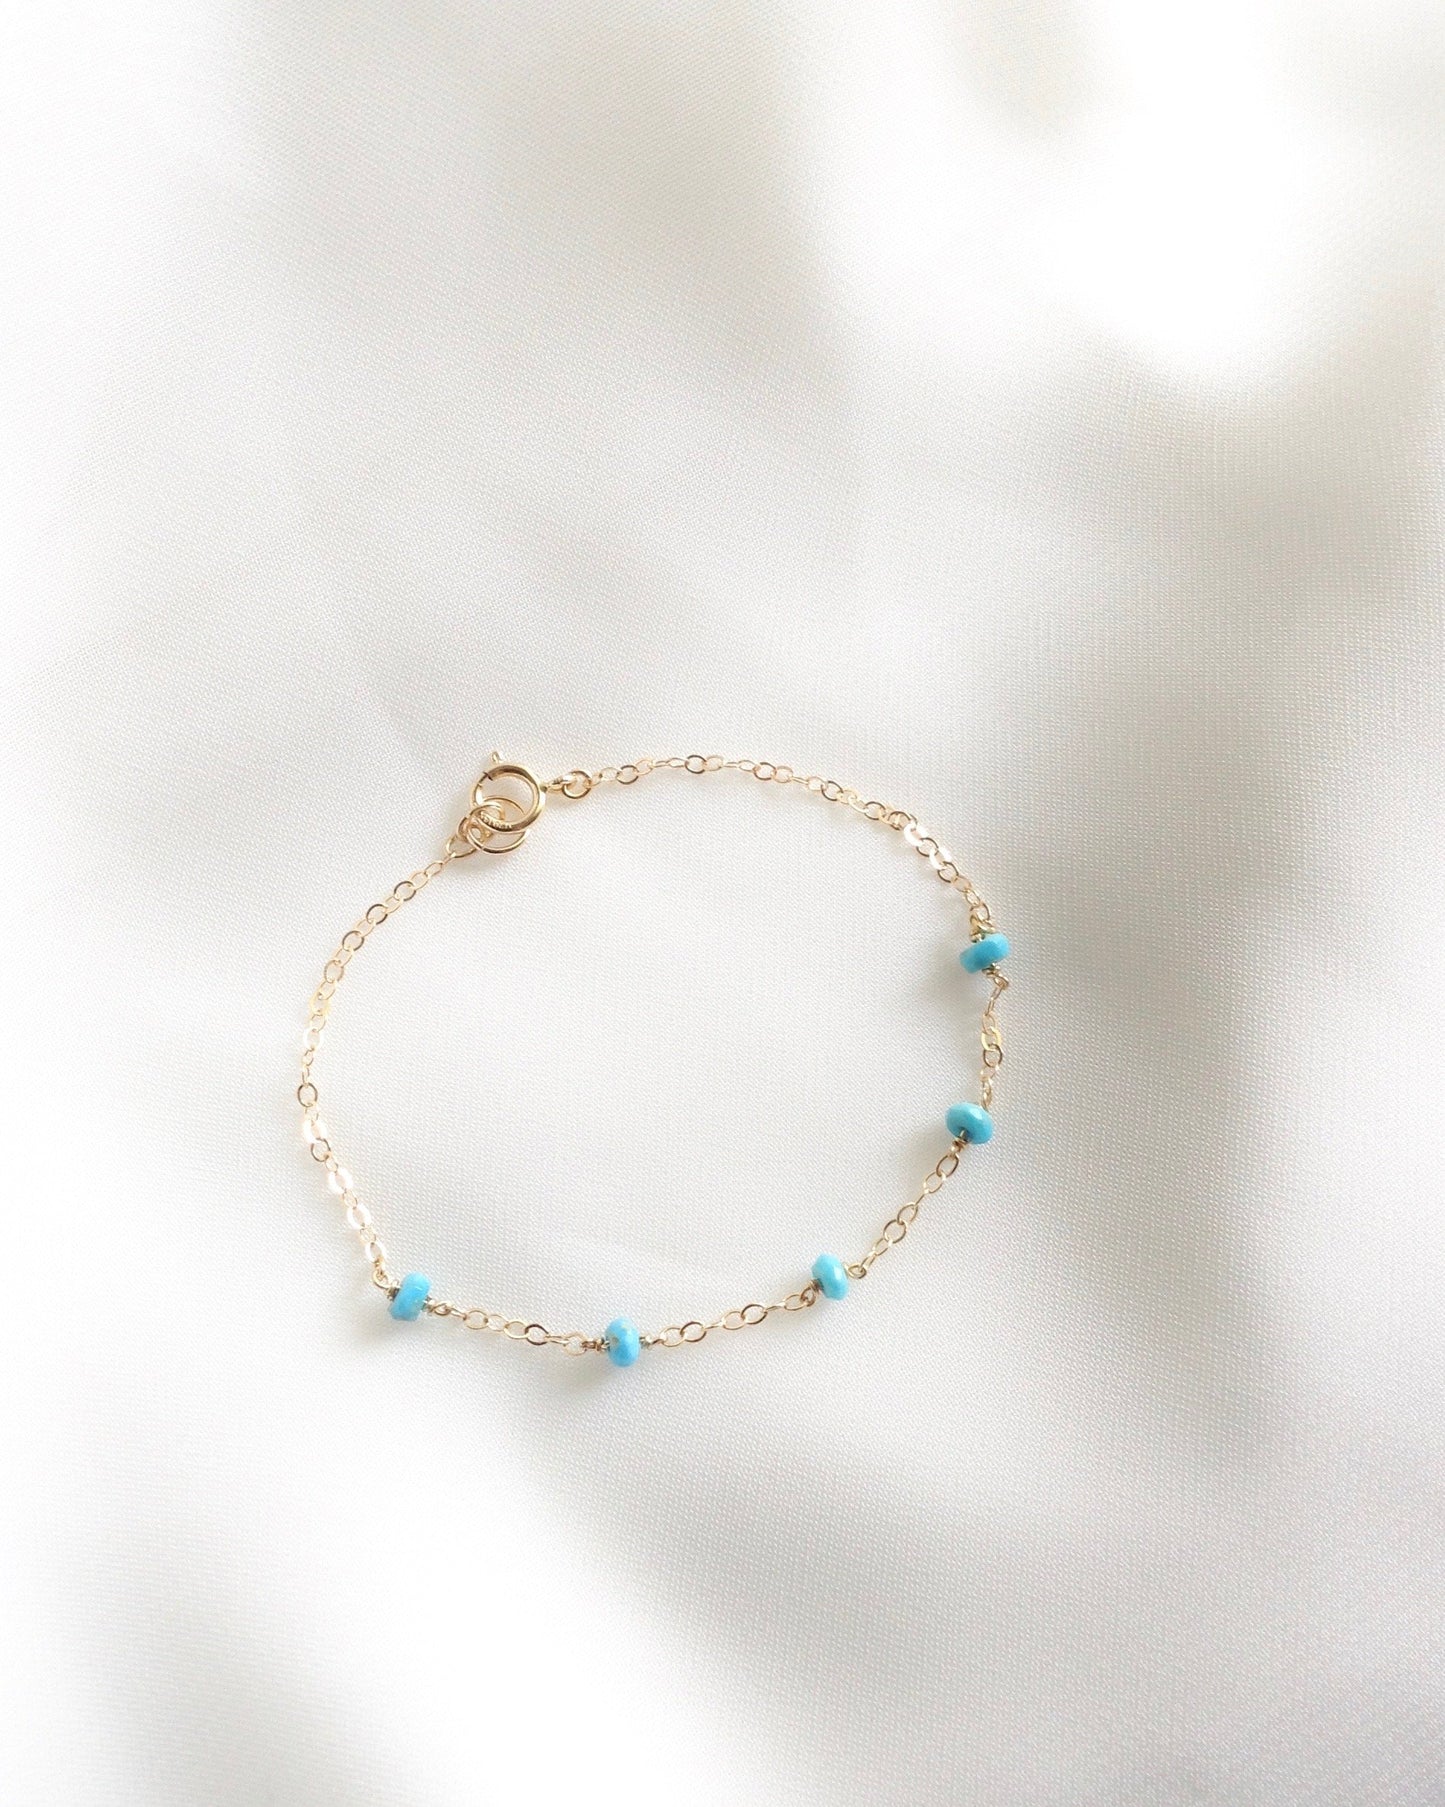 Genuine Turquoise Thin Chain Bracelet in Gold Filled or Sterling Silver | IB Jewelry